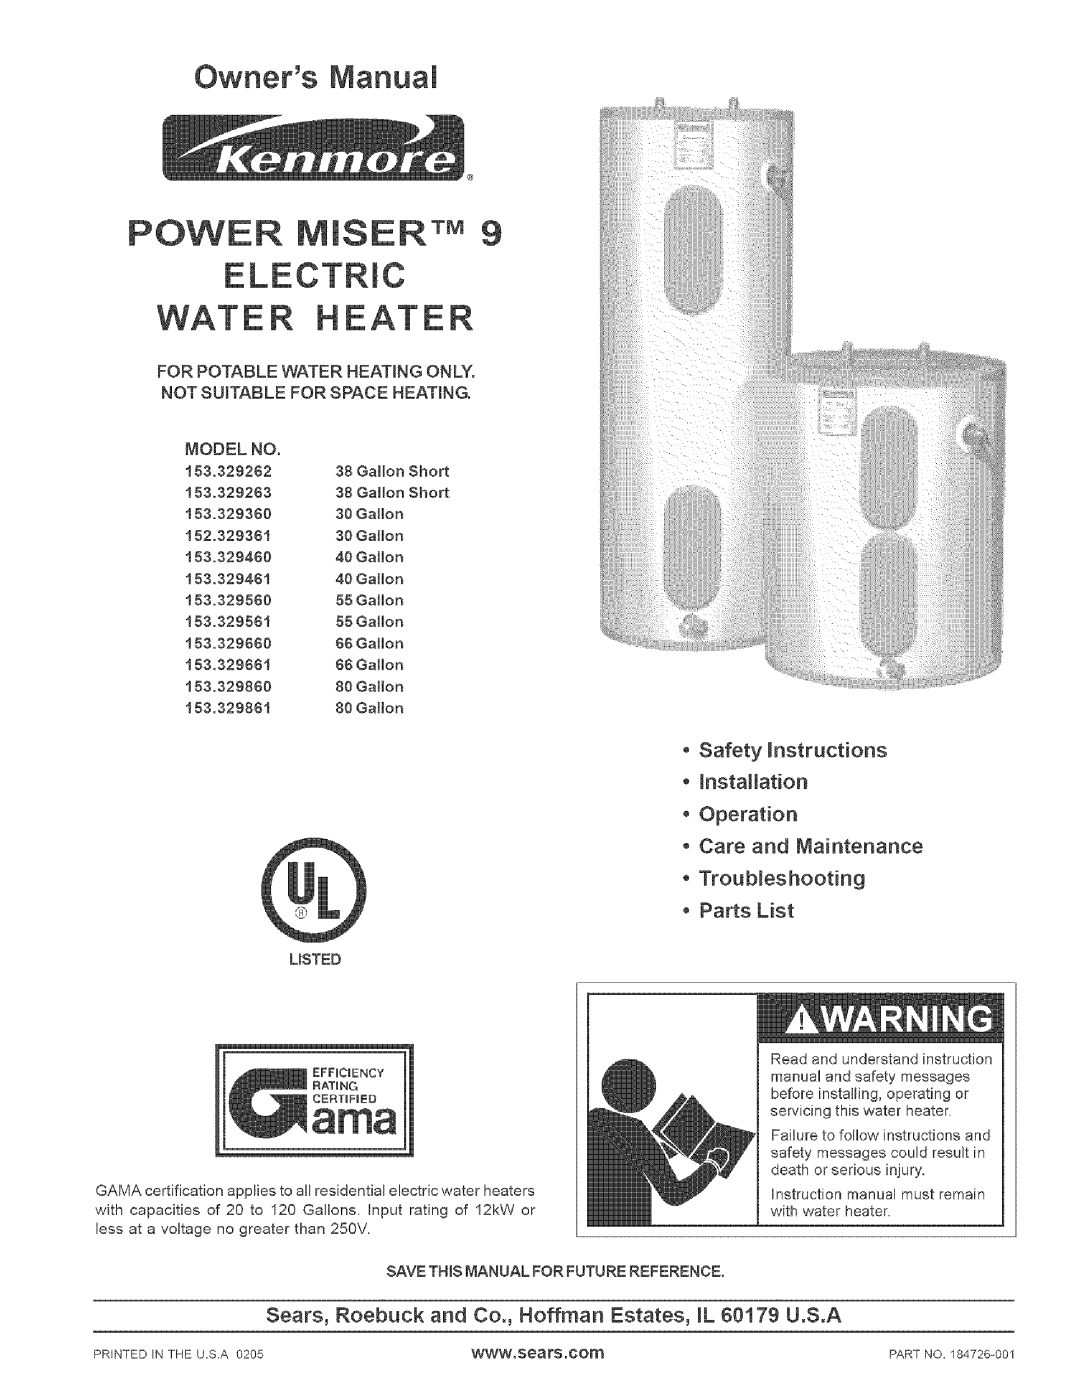 Kenmore 153.32956, 153.329461 instruction manual POWER MISERTM ELECTRmC WATER HEATER, Owners Manuam, o Parts List, Gallon 